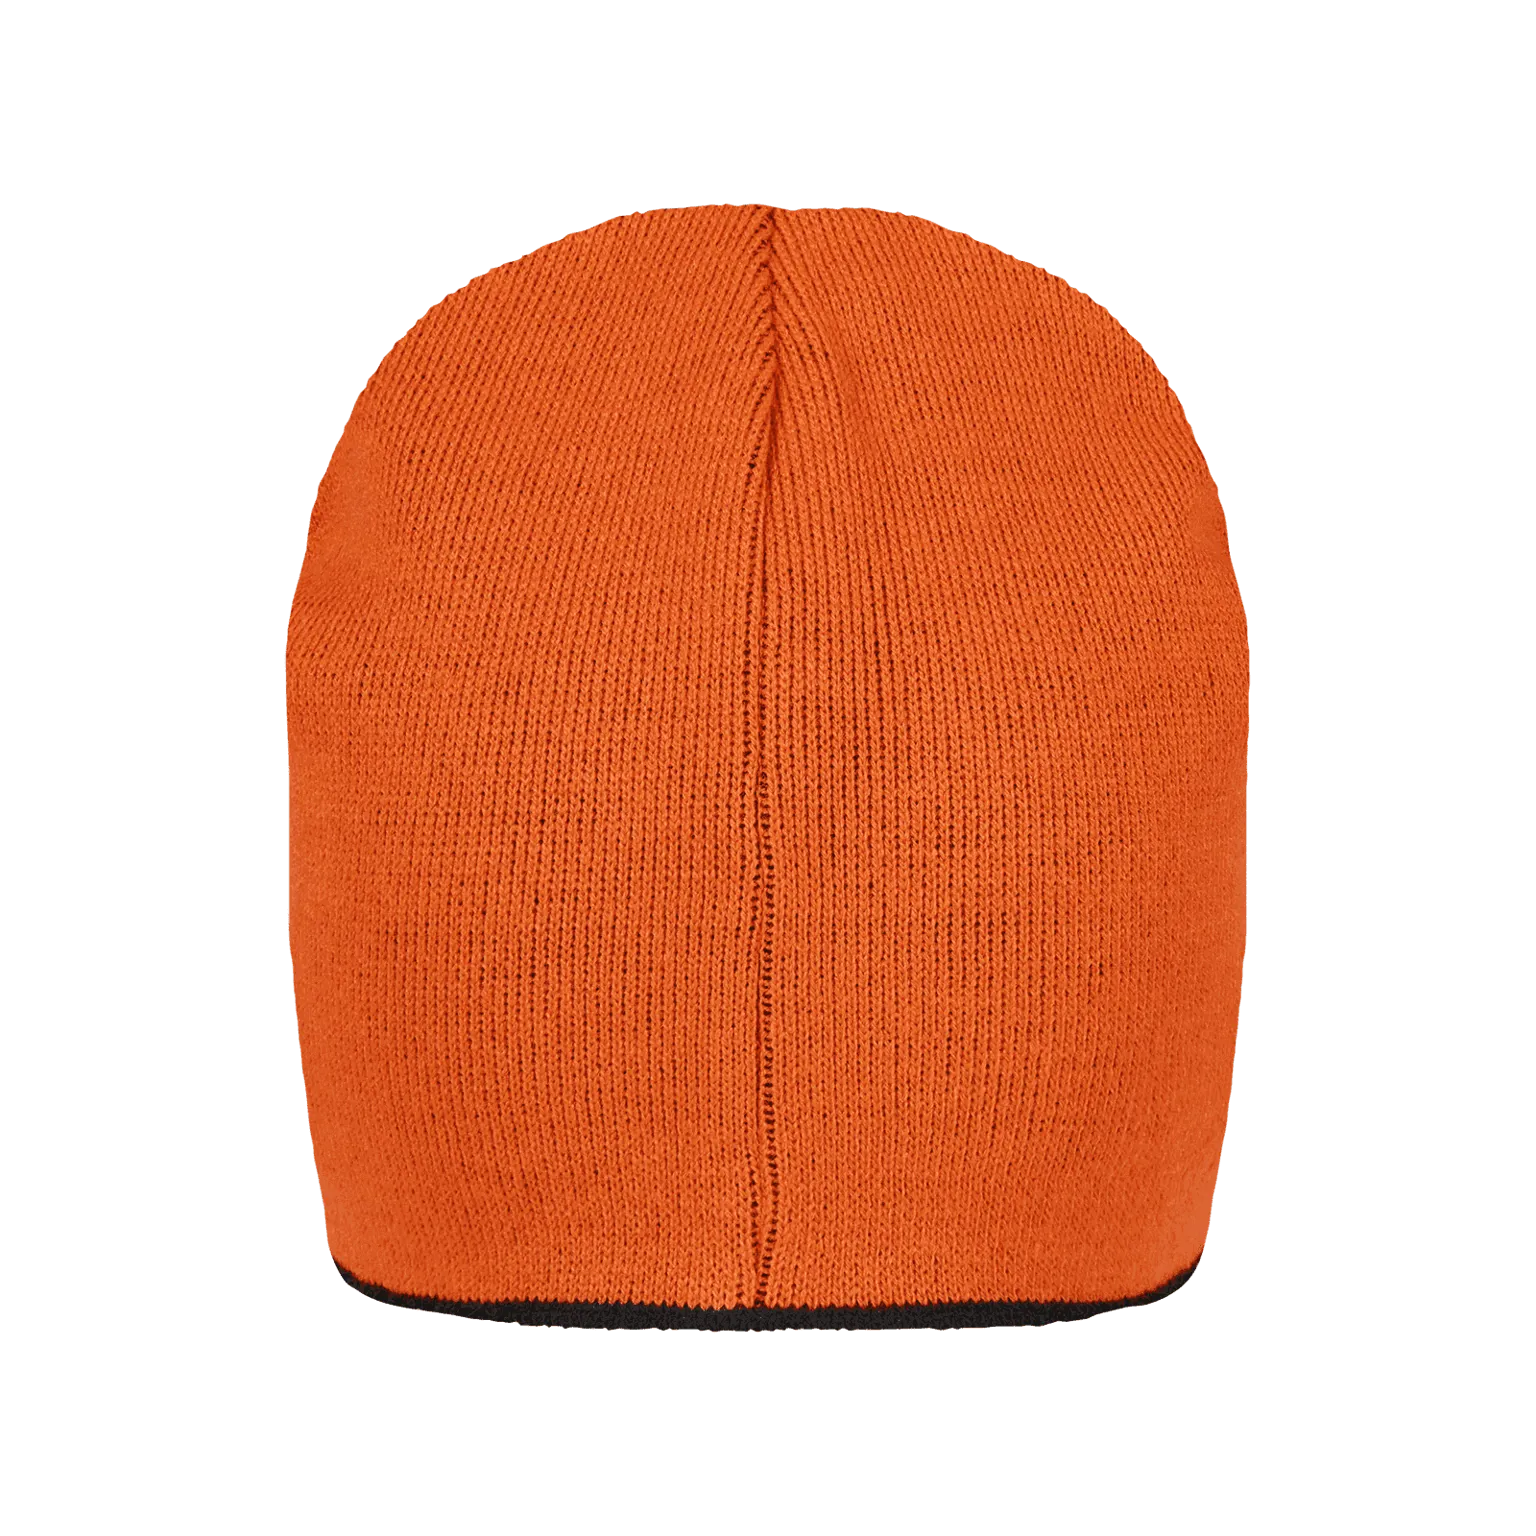 Aimpoint® Beanie - Knitted Orange and green reversible warm hat  - 4